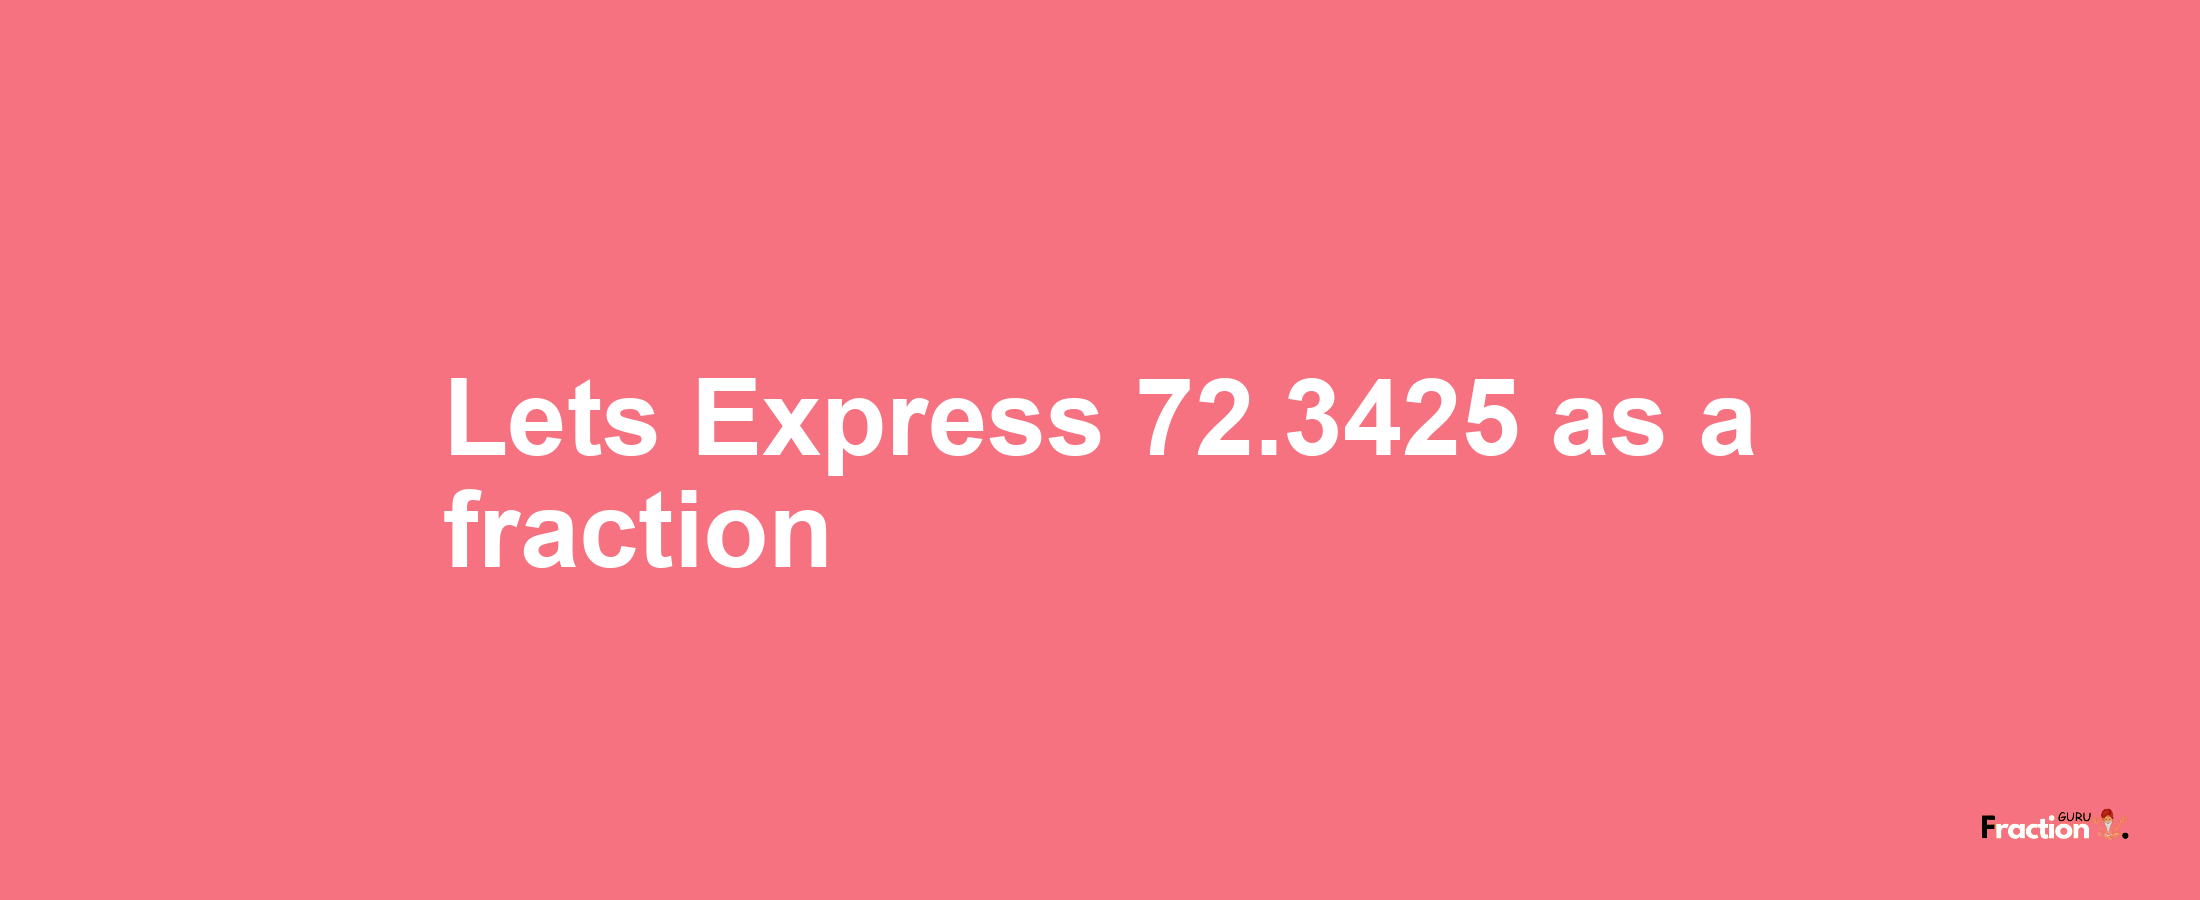 Lets Express 72.3425 as afraction